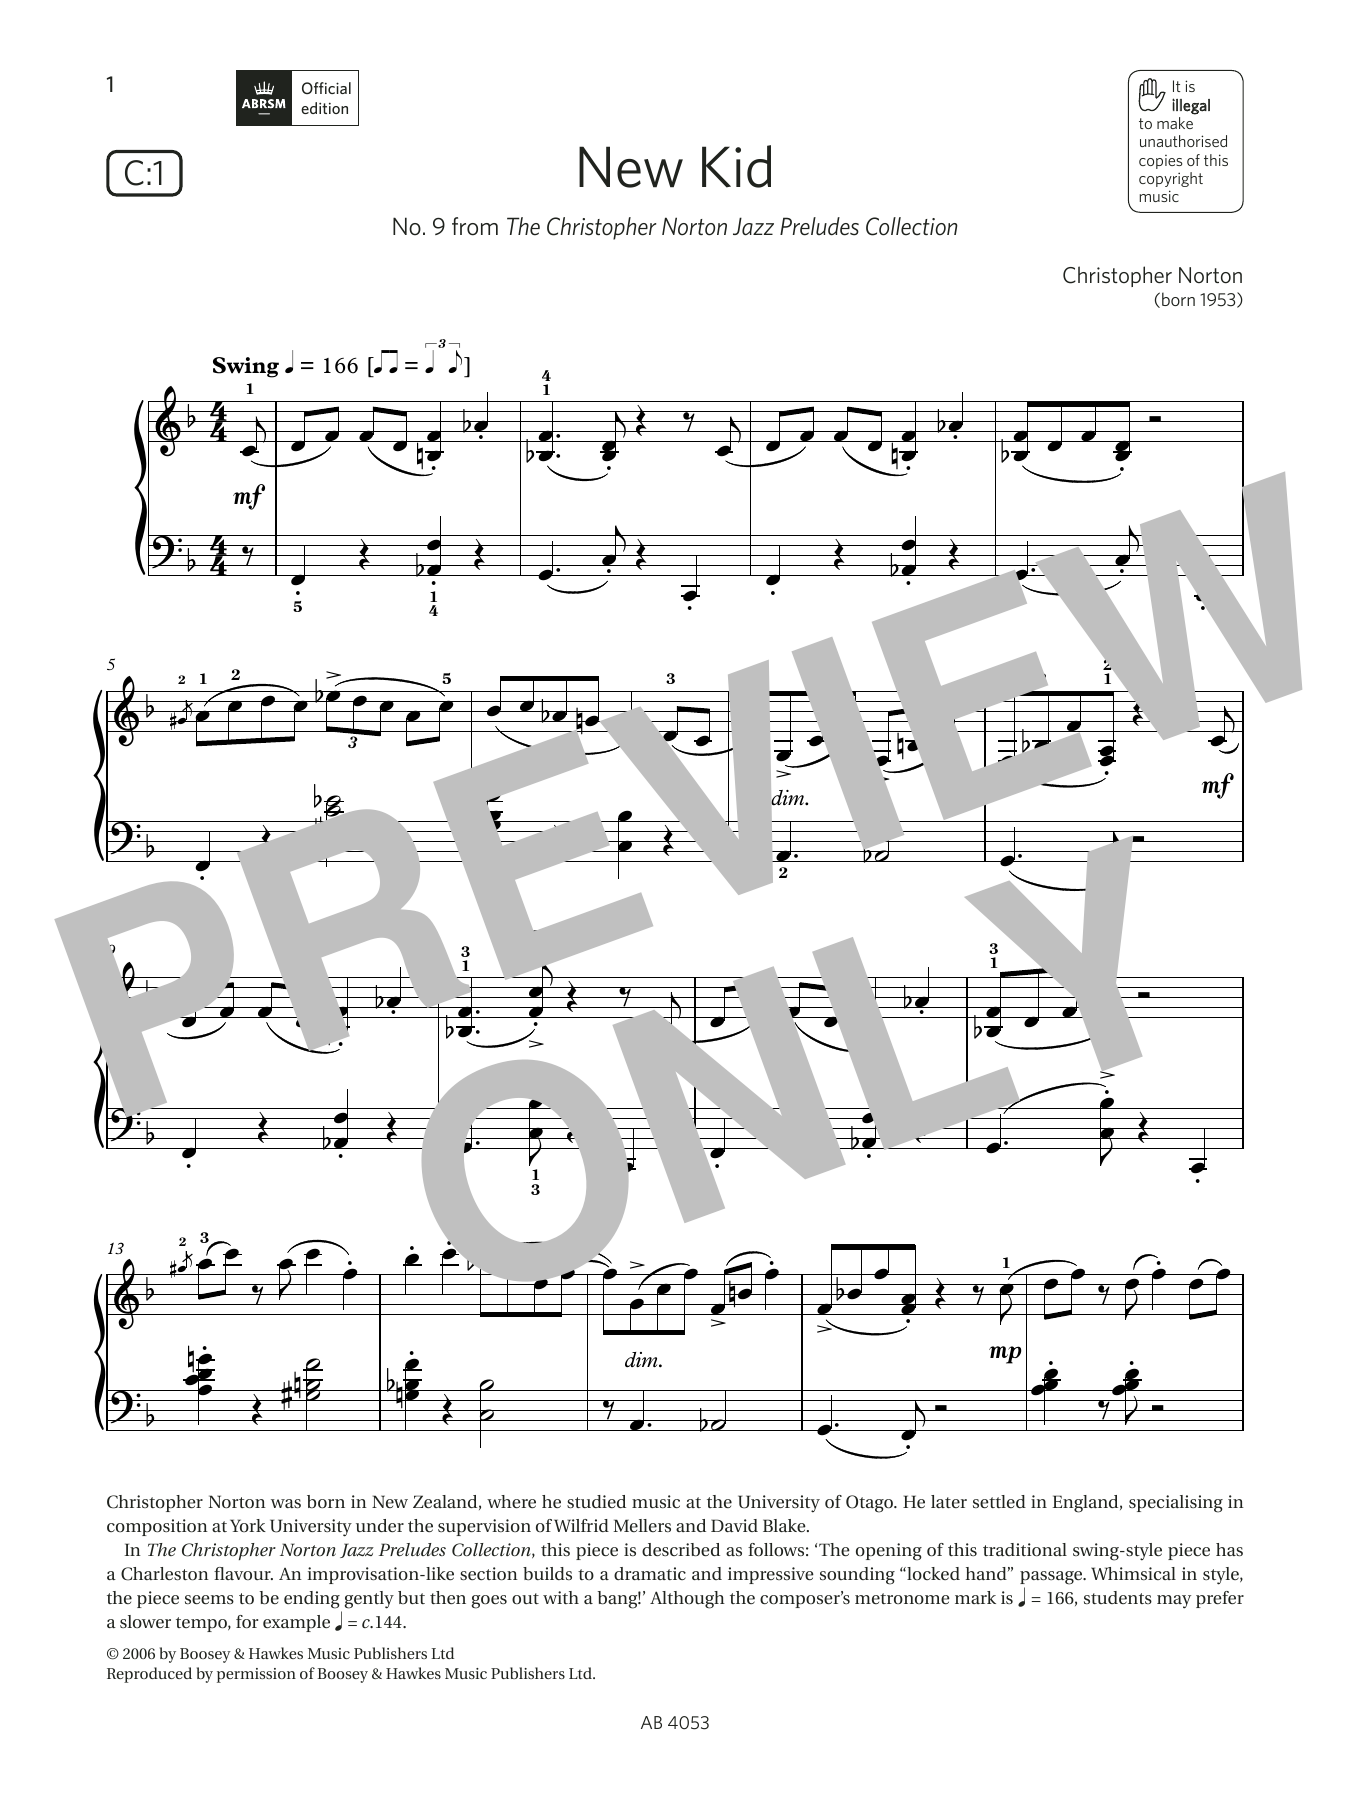 Download Christopher Norton New Kid (Grade 7, list C1, from the ABR Sheet Music